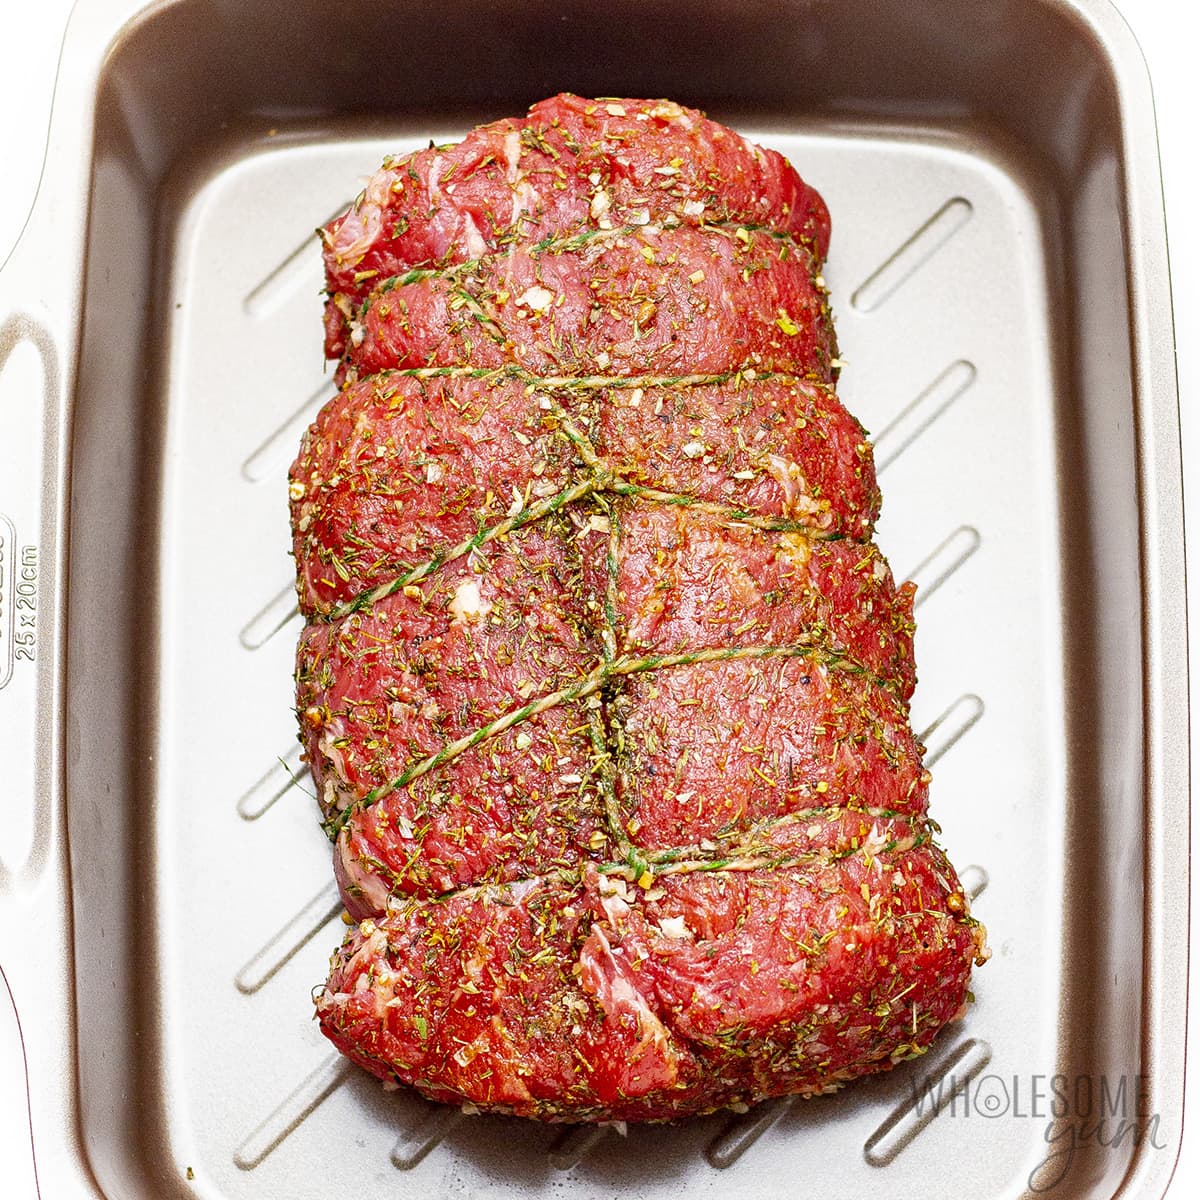 Roast covered with oil and seasonings.